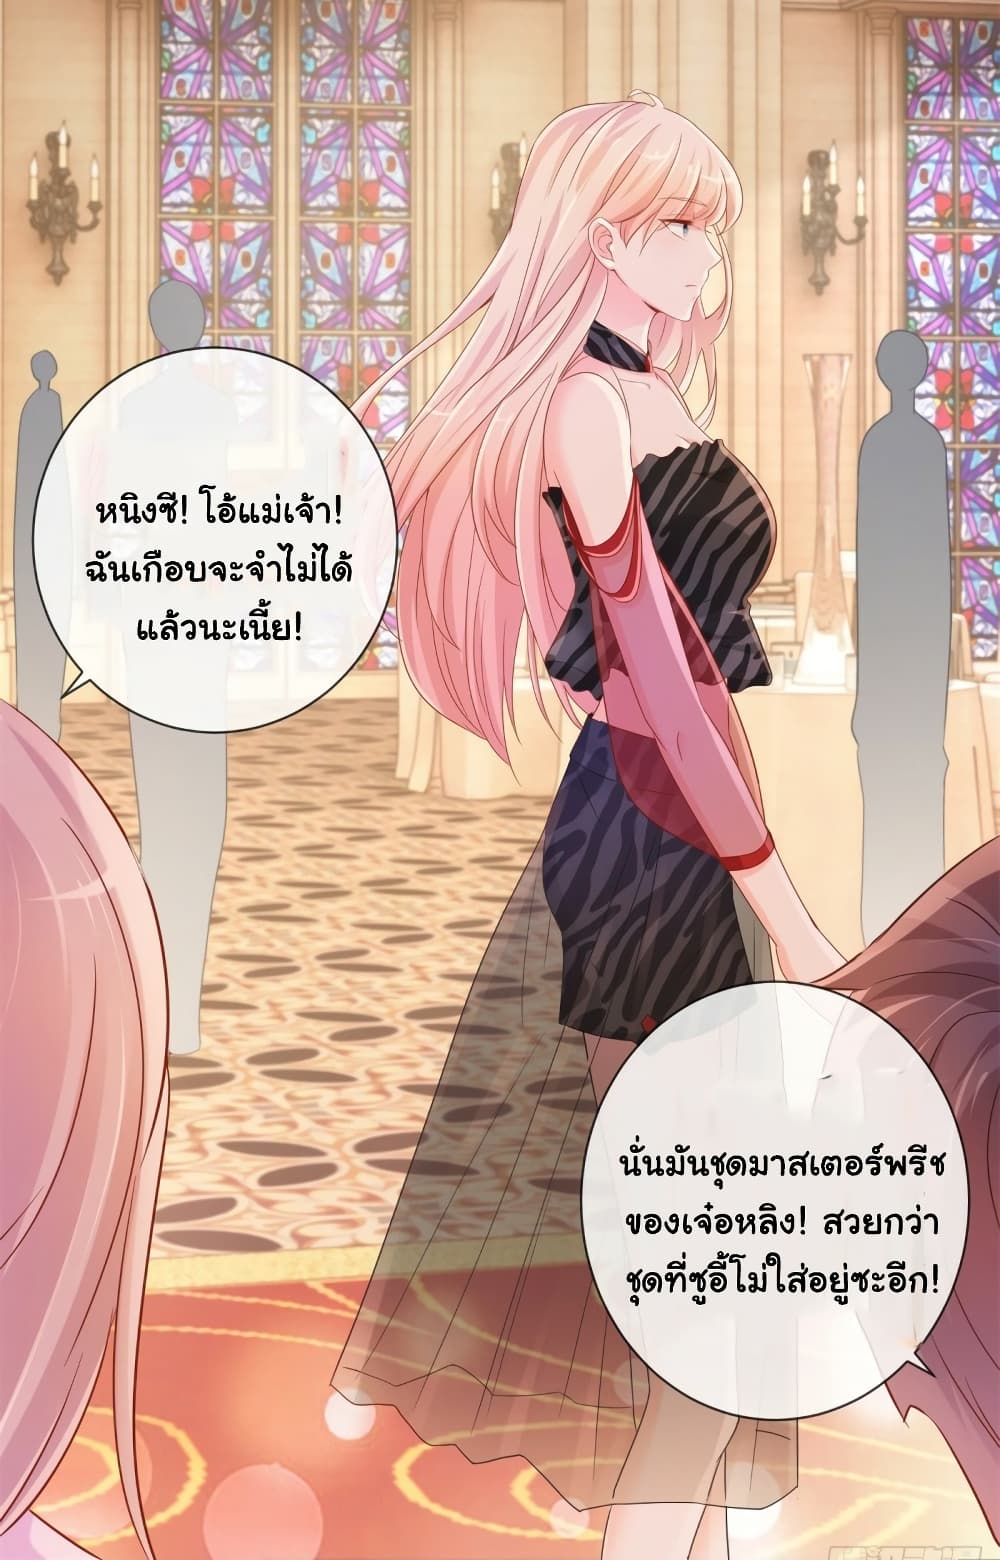 The Lovely Wife And Strange Marriage à¹à¸œà¸™à¸£à¸±à¸à¸¥à¸§à¸‡à¹ƒà¸ˆ 322 (27)